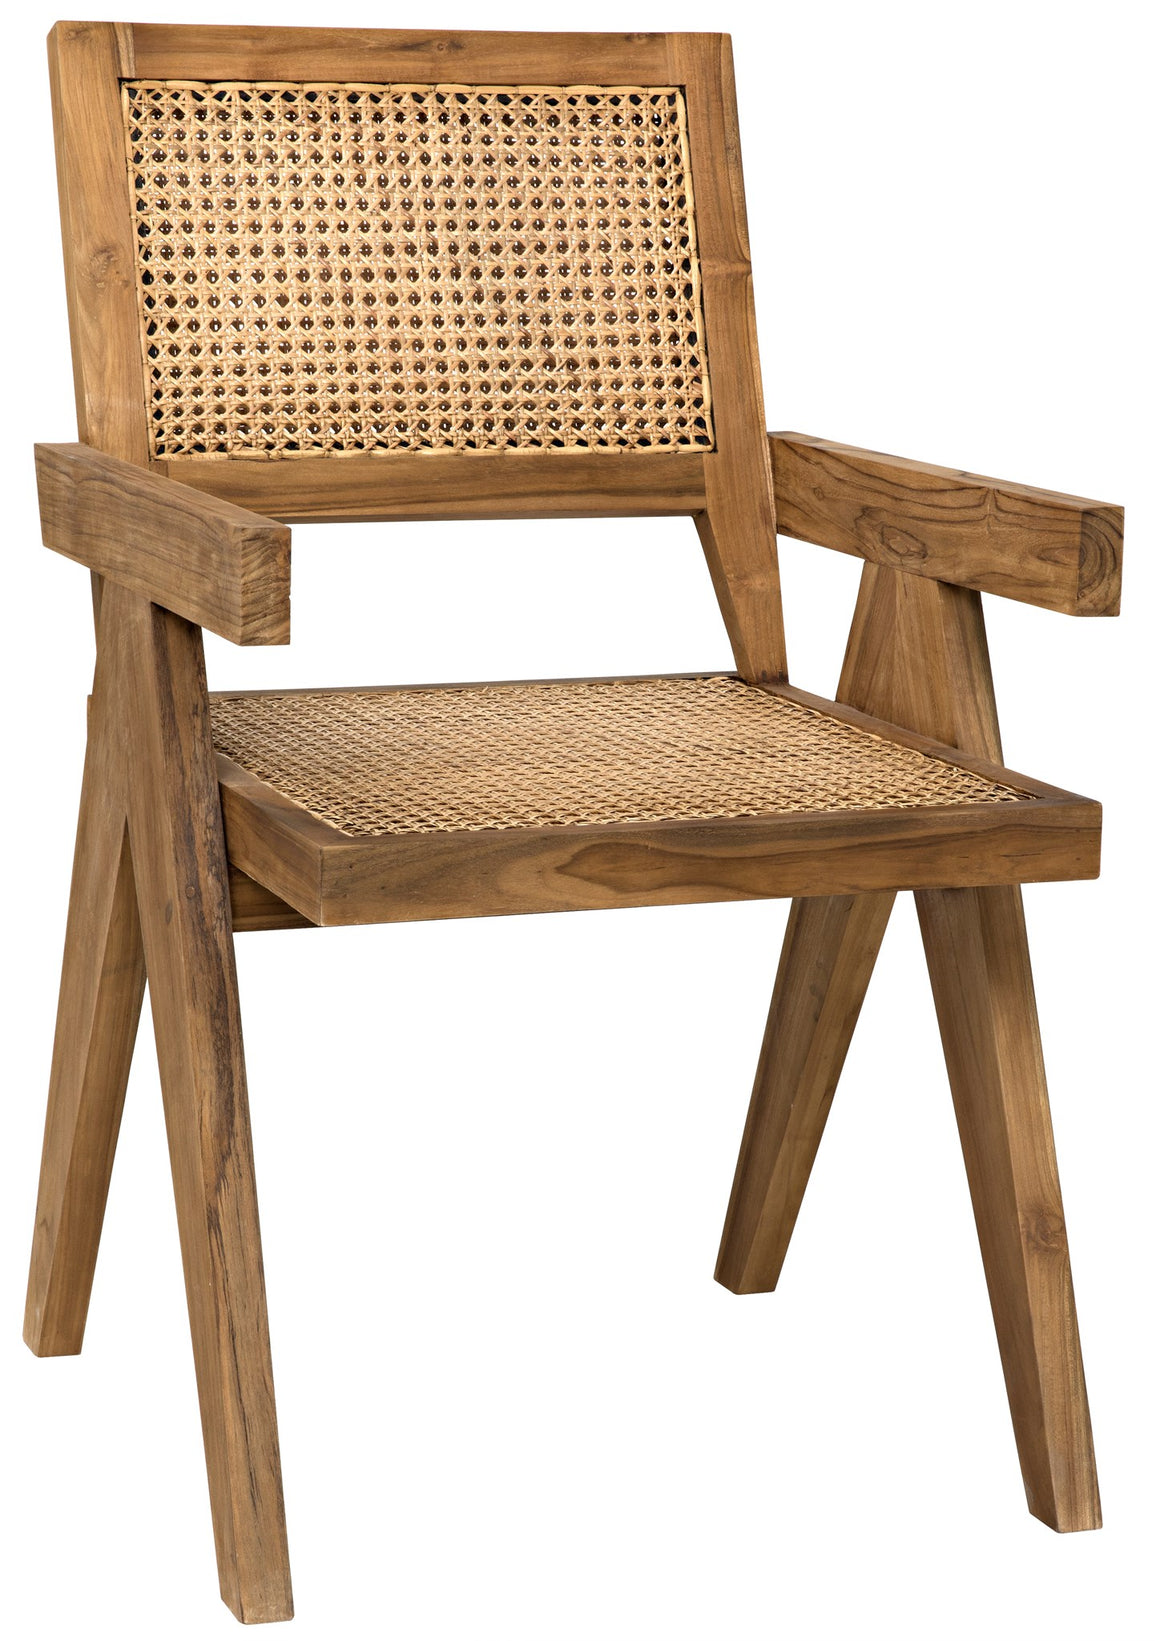 Noir Jude Chair - Teak with Caning